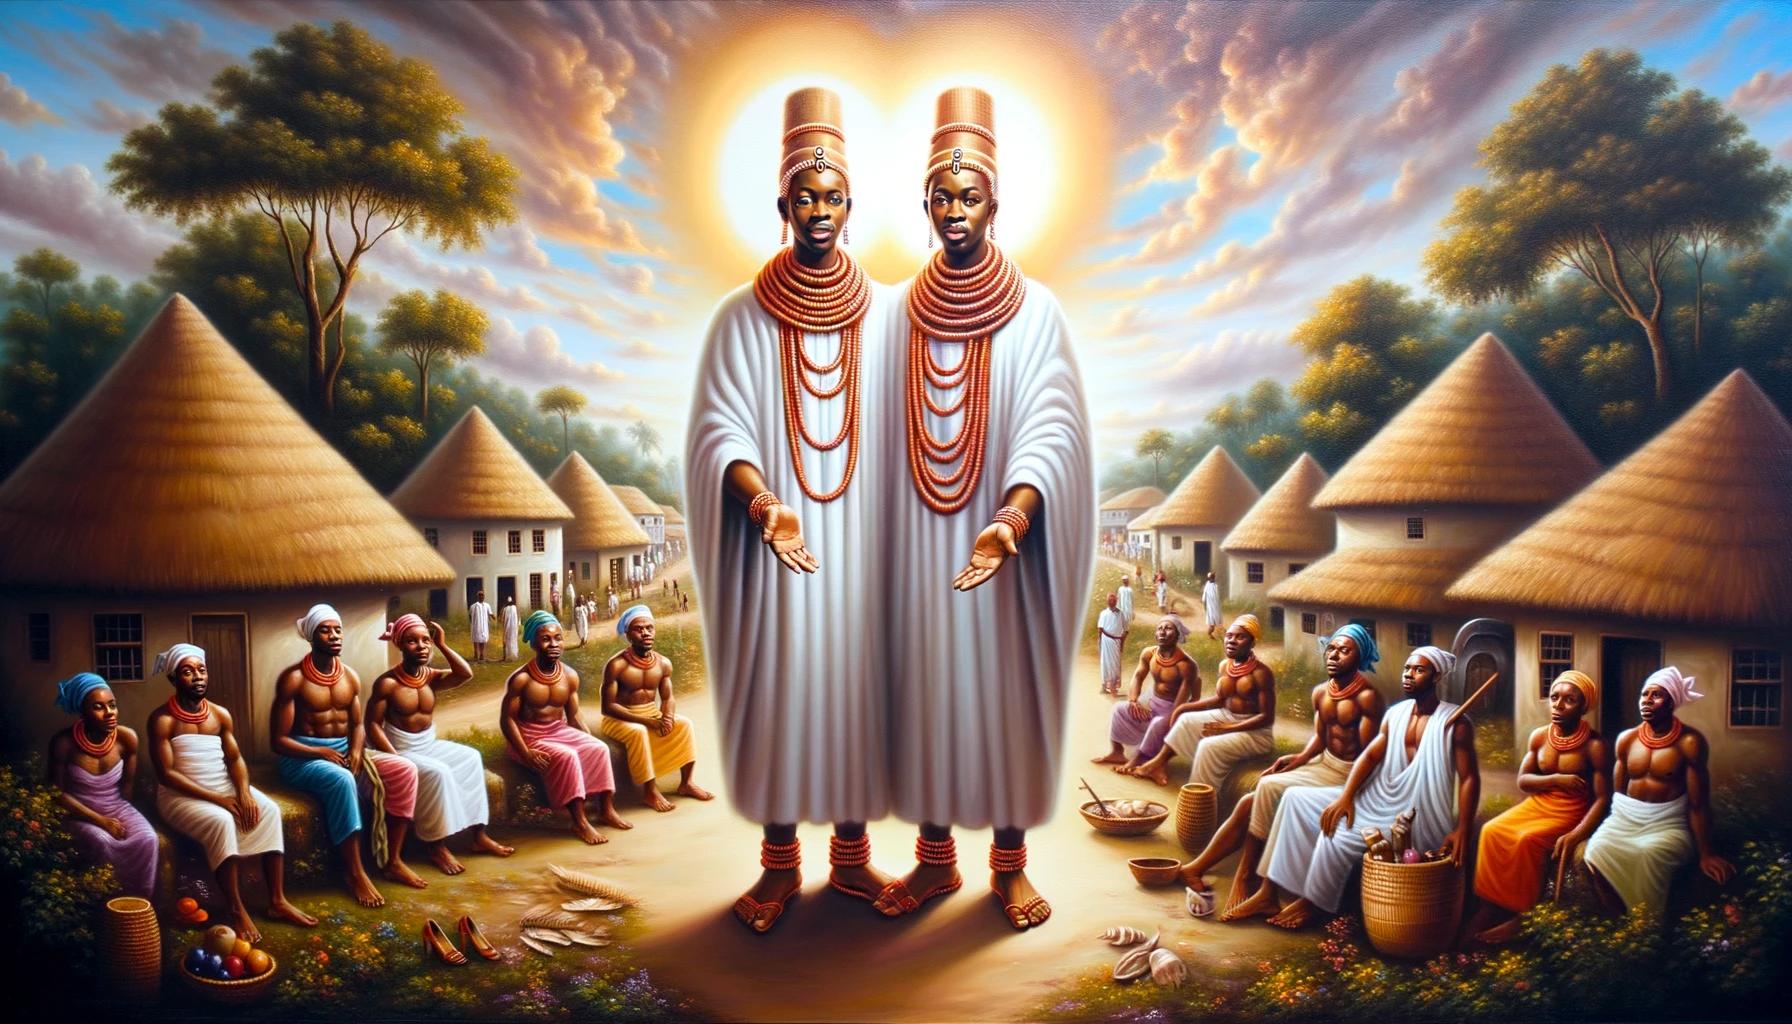 Ibeji Twins Story: Exploring the Fascinating Yoruba Twin Tradition in African Art and Culture